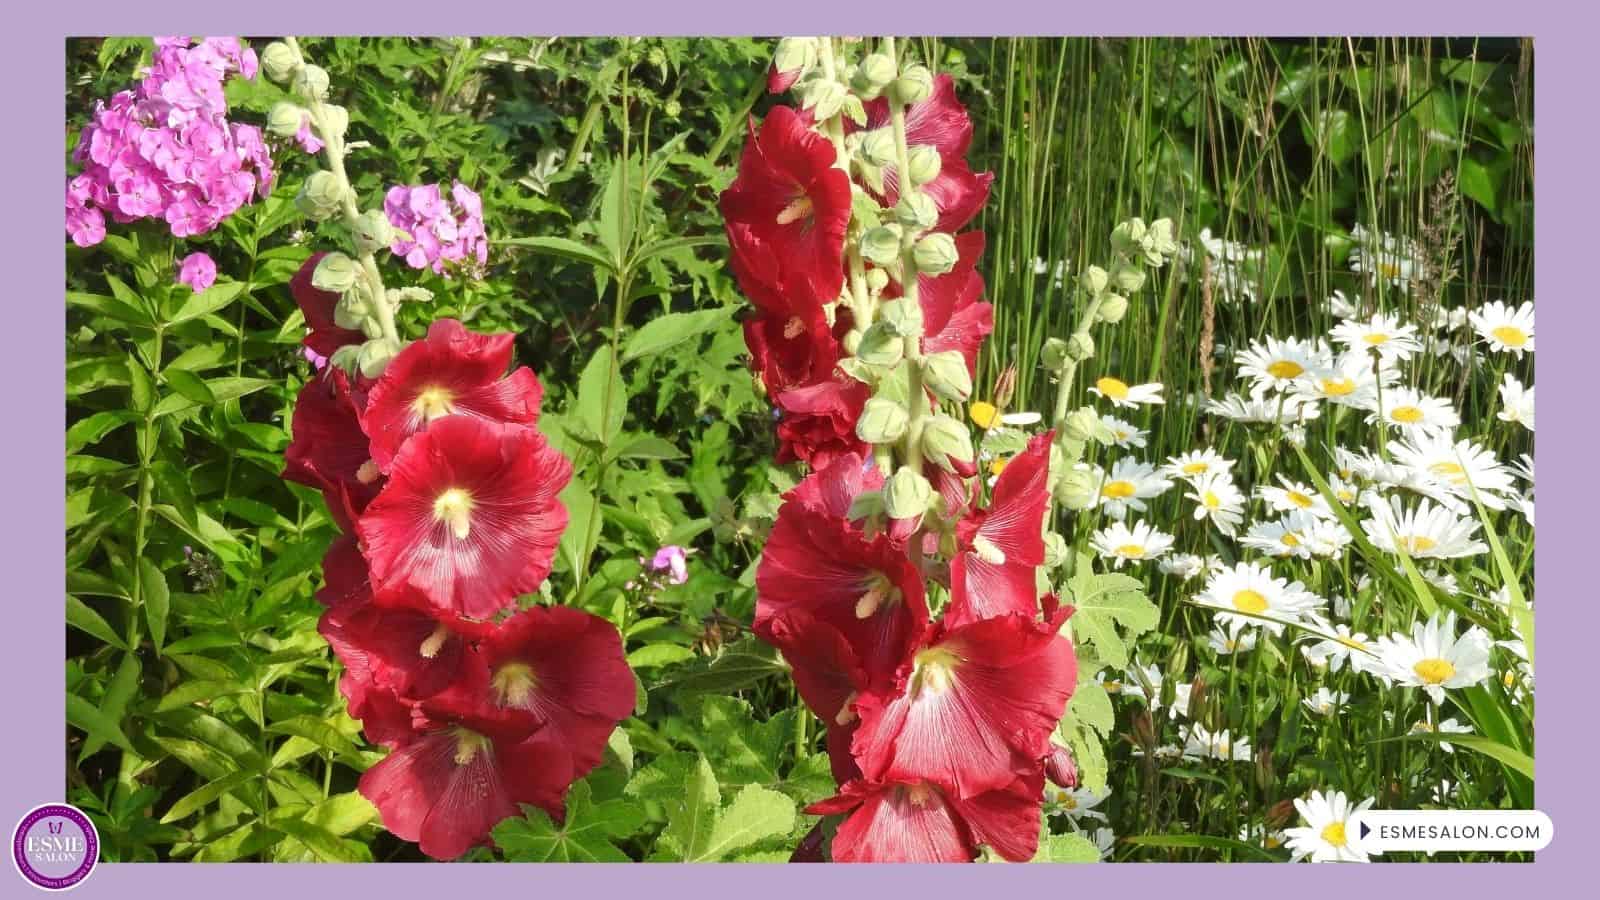 An image of Hollyhock flowers